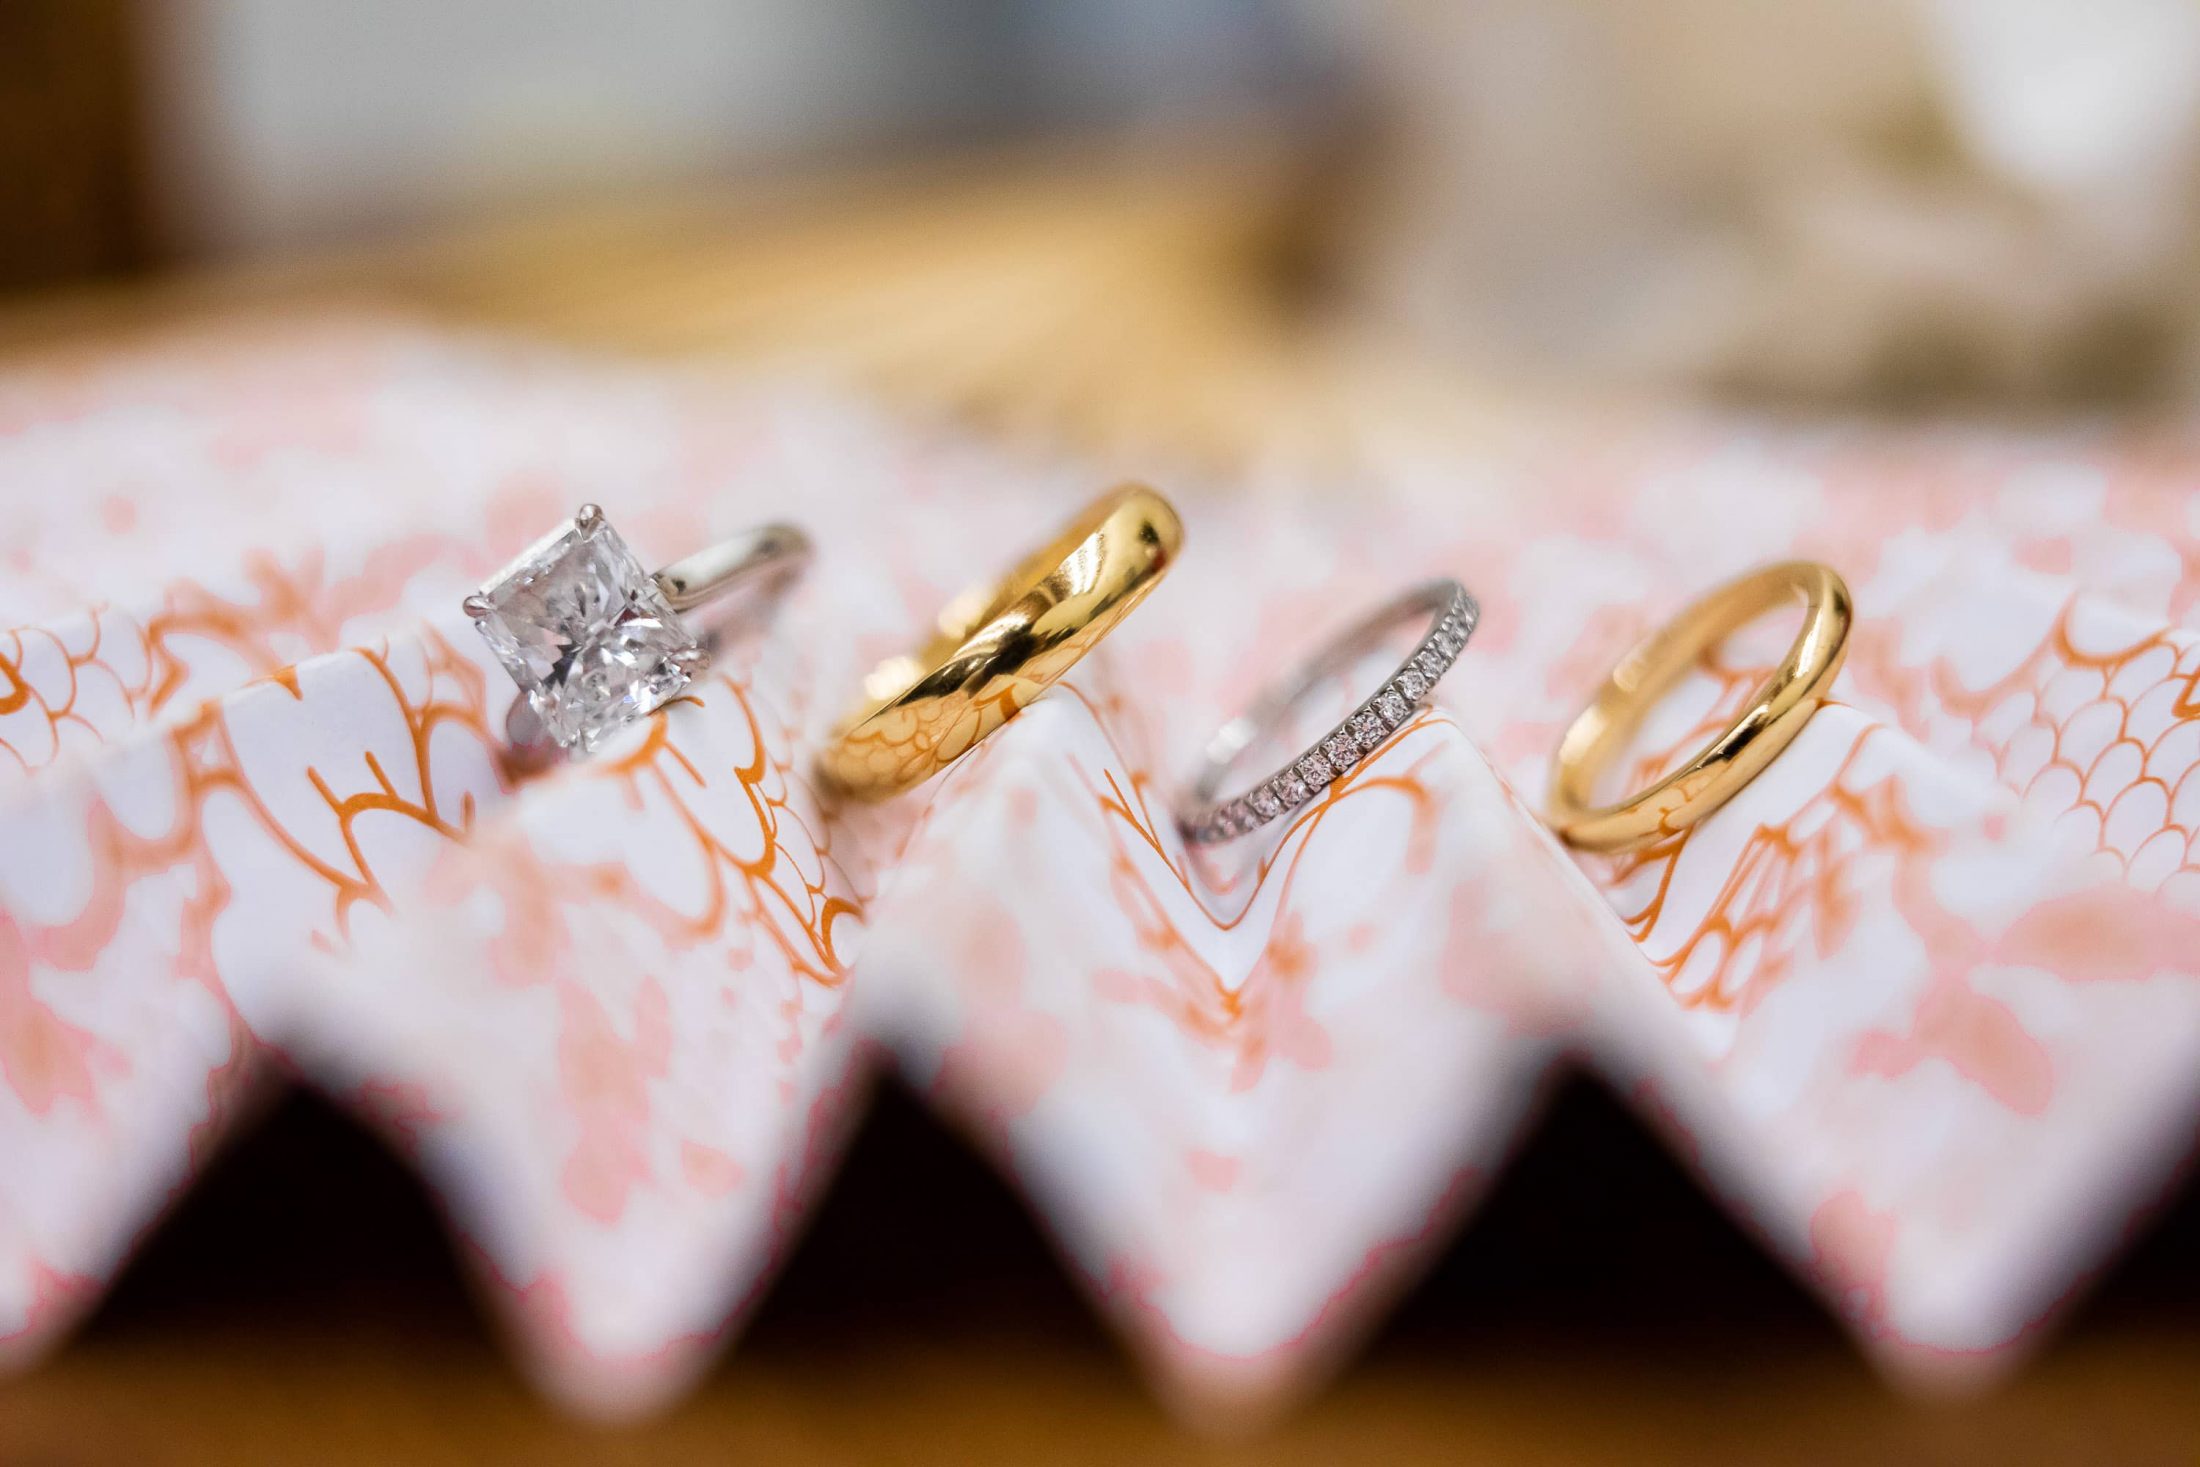 Bride and groom rings at this Hamptons wedding weekend held at The Parrish Museum | Photo by Roey Yohai Studio